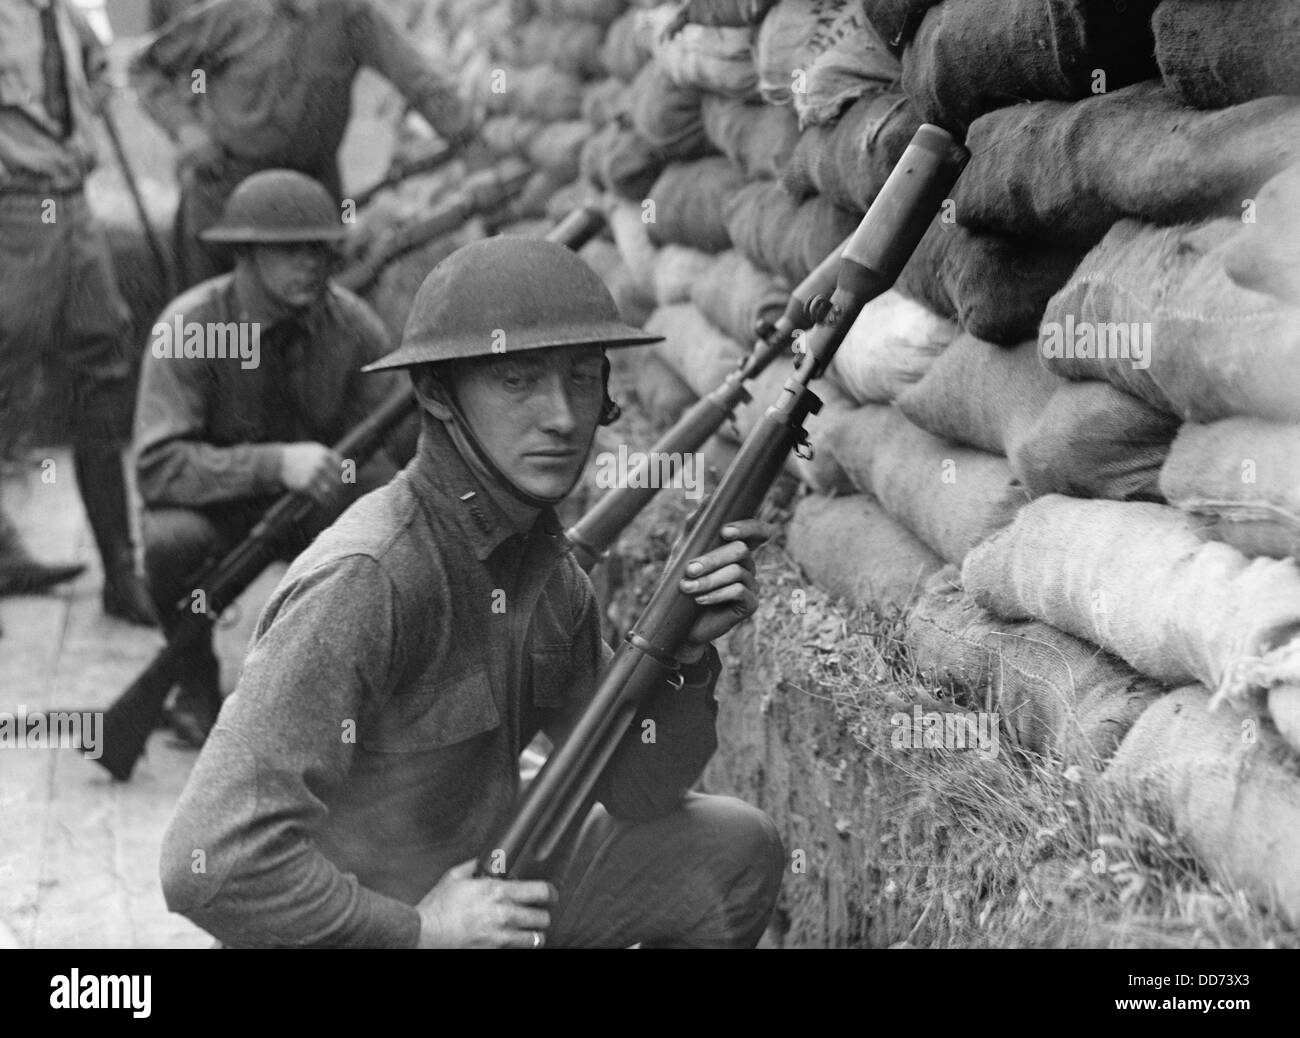 U.S. Army soldier, probably in training in 1917-18 near Washington, D.C. (BSLOC 2013 5 153) Stock Photo